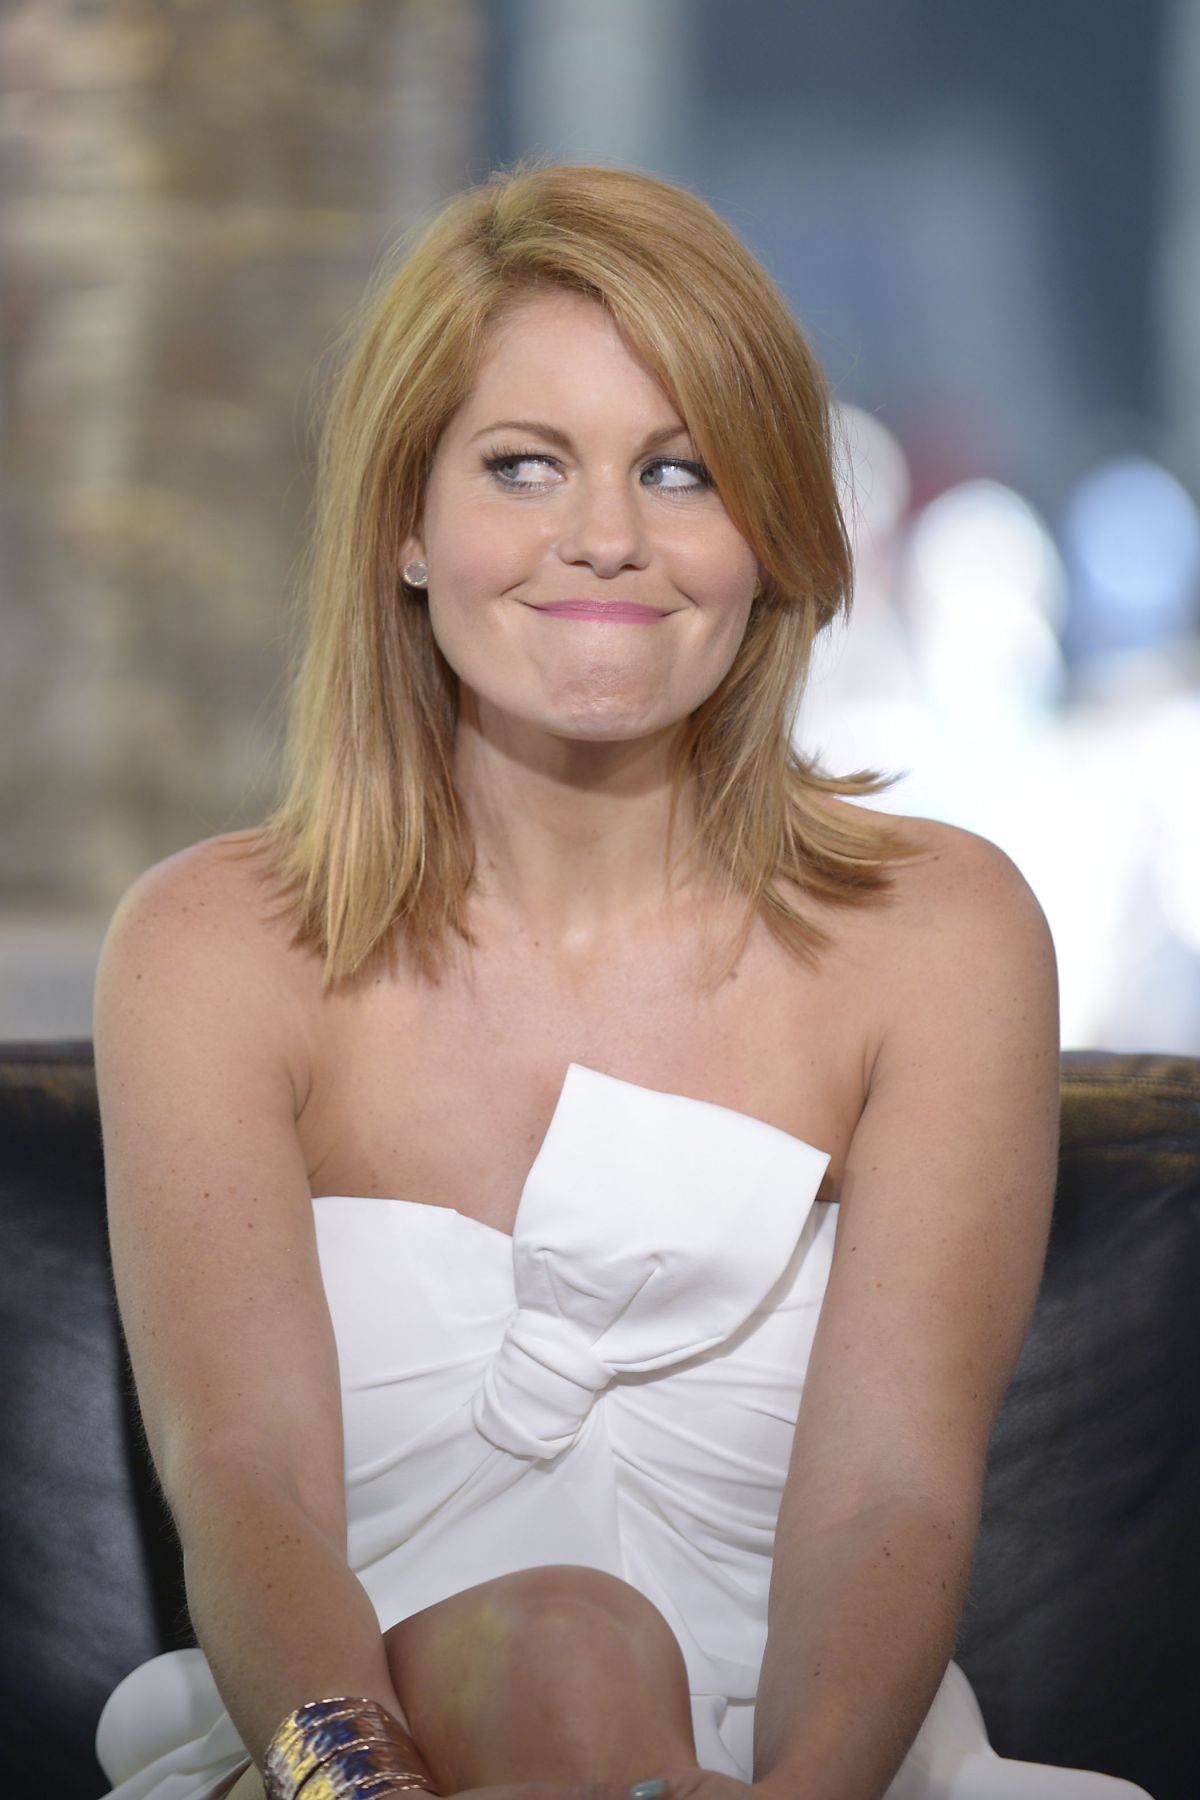 CANDACE CAMERON BURE at VH1 Big Morning Buzz in New York – HawtCelebs